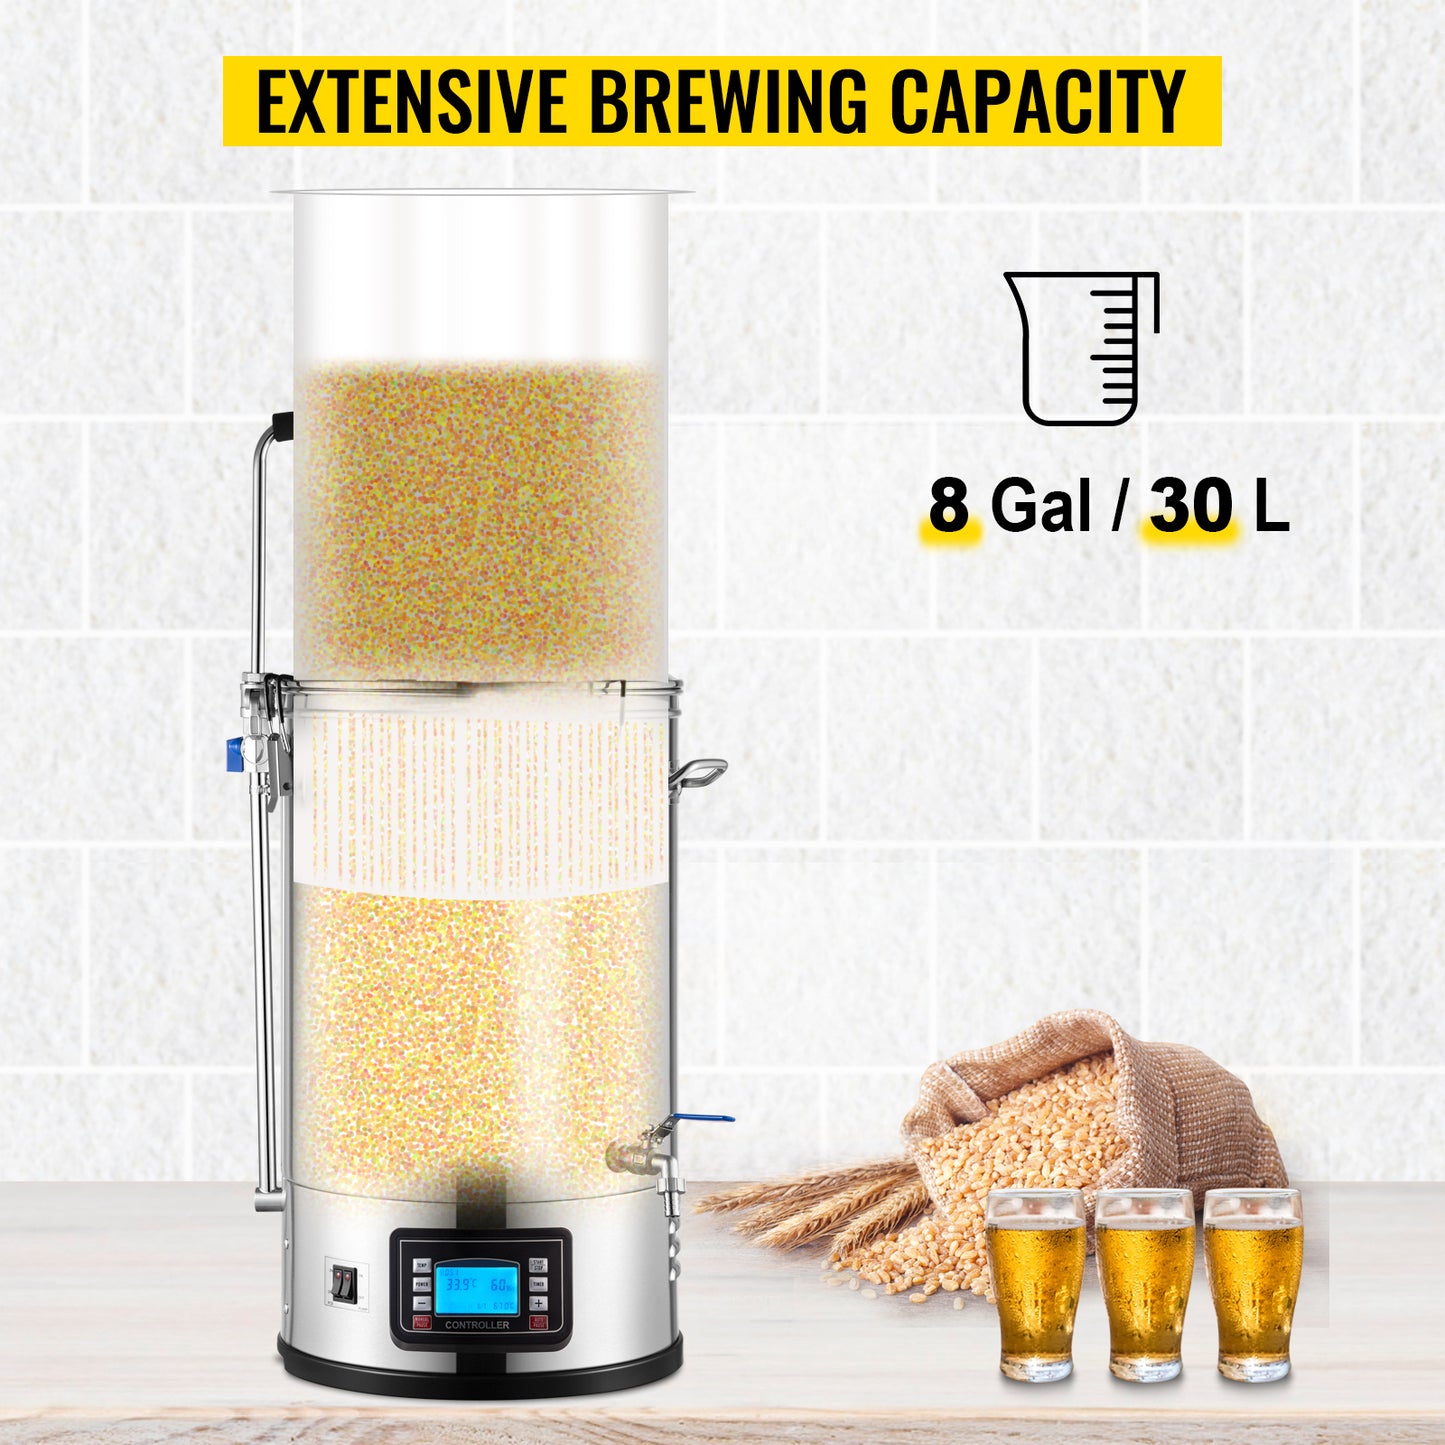 VEVOR 35L 110/220V 304 Stainless Steel All-in-One Home Beer Brewer Electric Brewing System with Pump